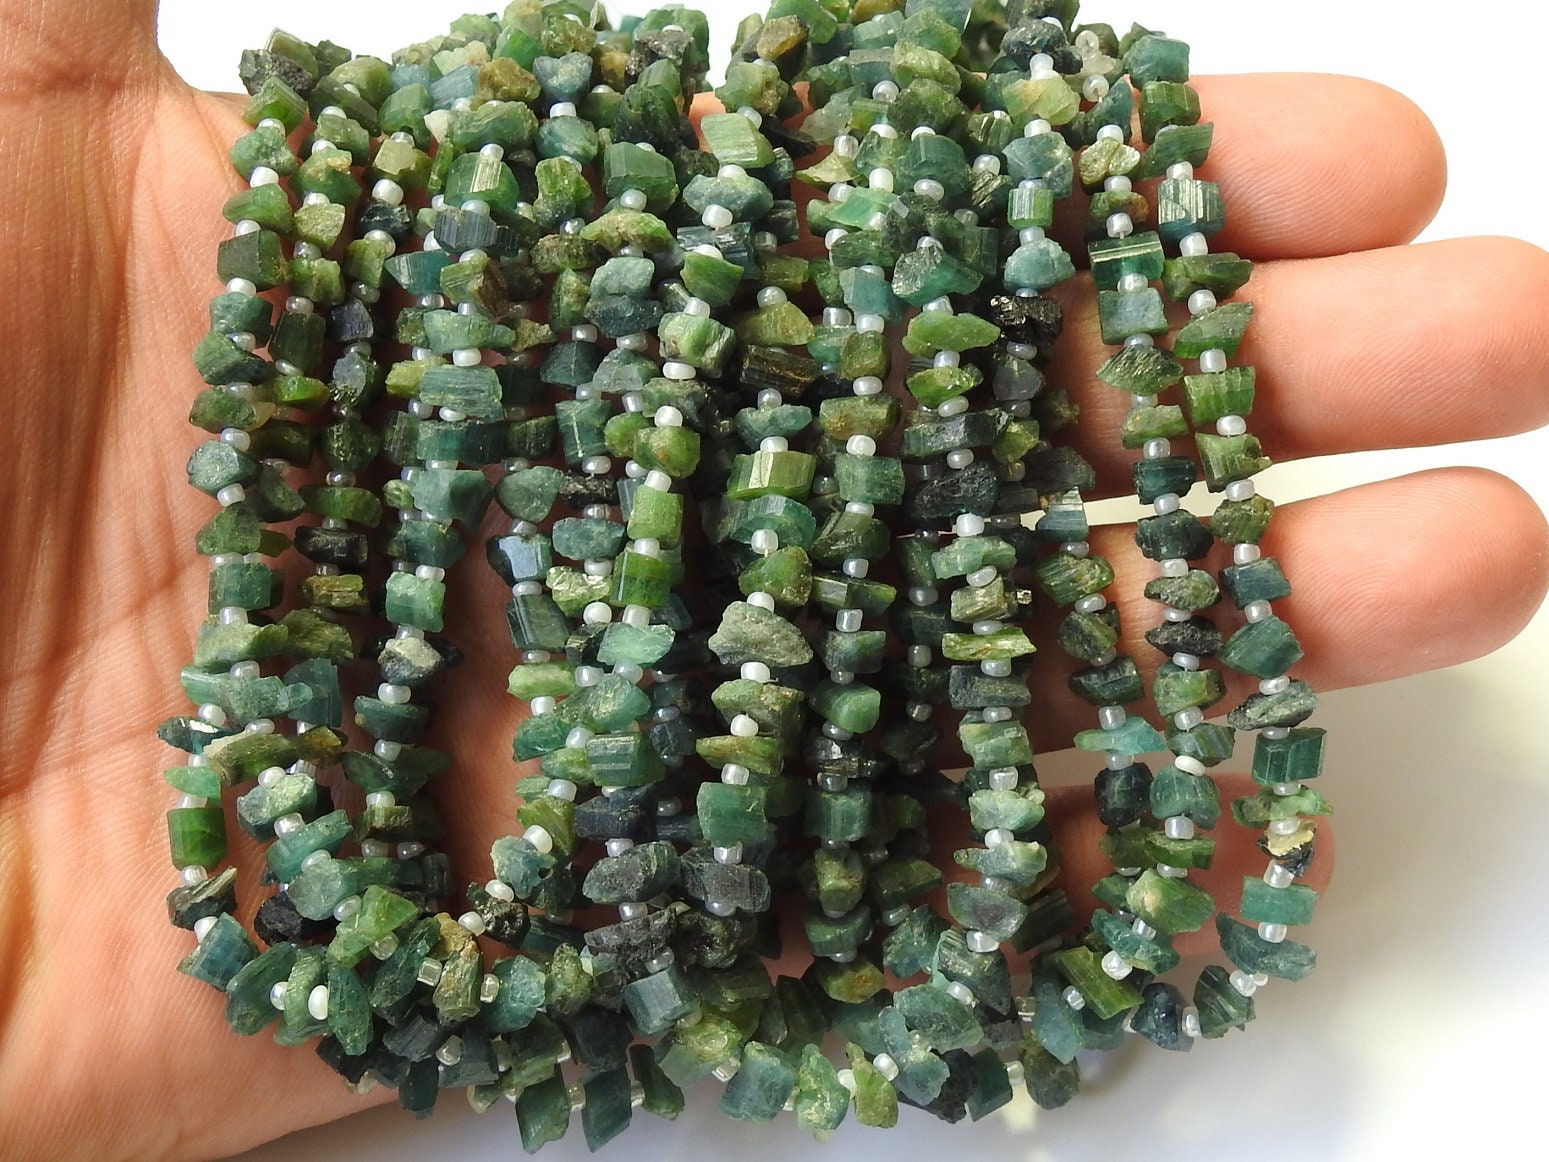 Green Tourmaline Natural Crystal Rough Beads,Chips,Uncut,Nuggets,Anklets,14Inchs Strand 6X3To4X3MM Approx,Wholesaler,Supplies,RB2 | Save 33% - Rajasthan Living 13